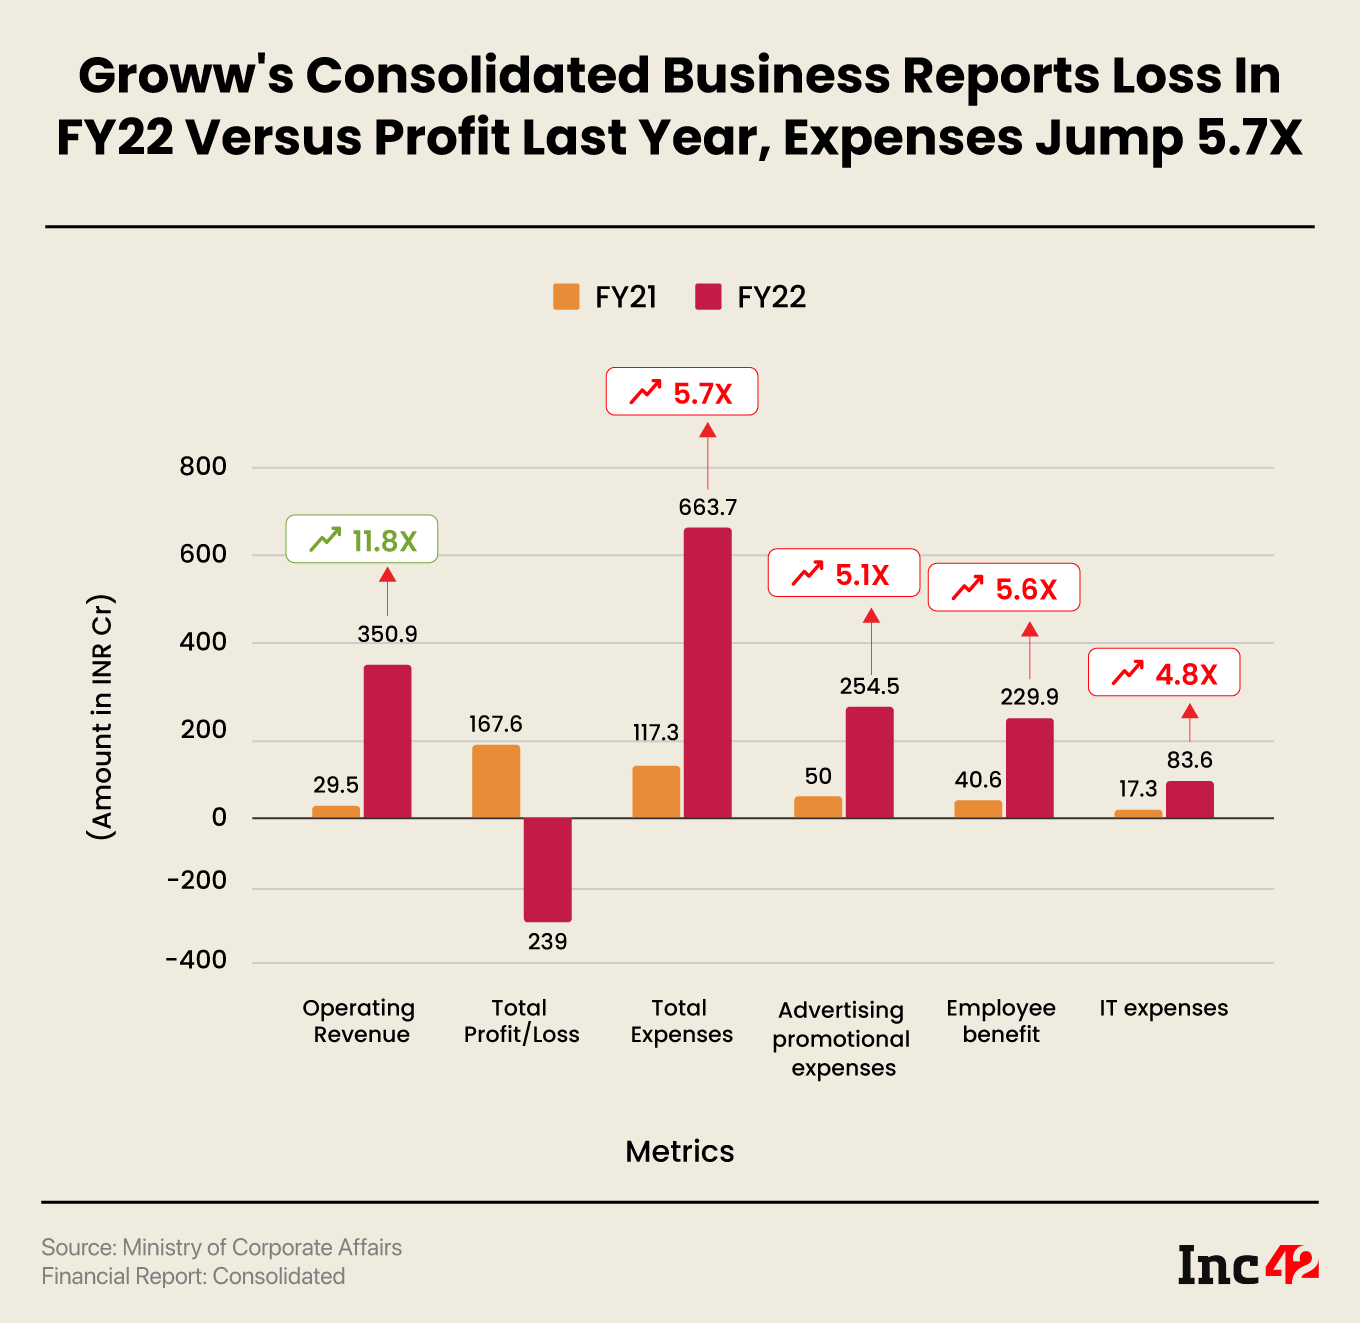  Groww's Consolidated Business Reports Loss In FY22 Versus Profit Last Year, Expenses Jump 5.7X